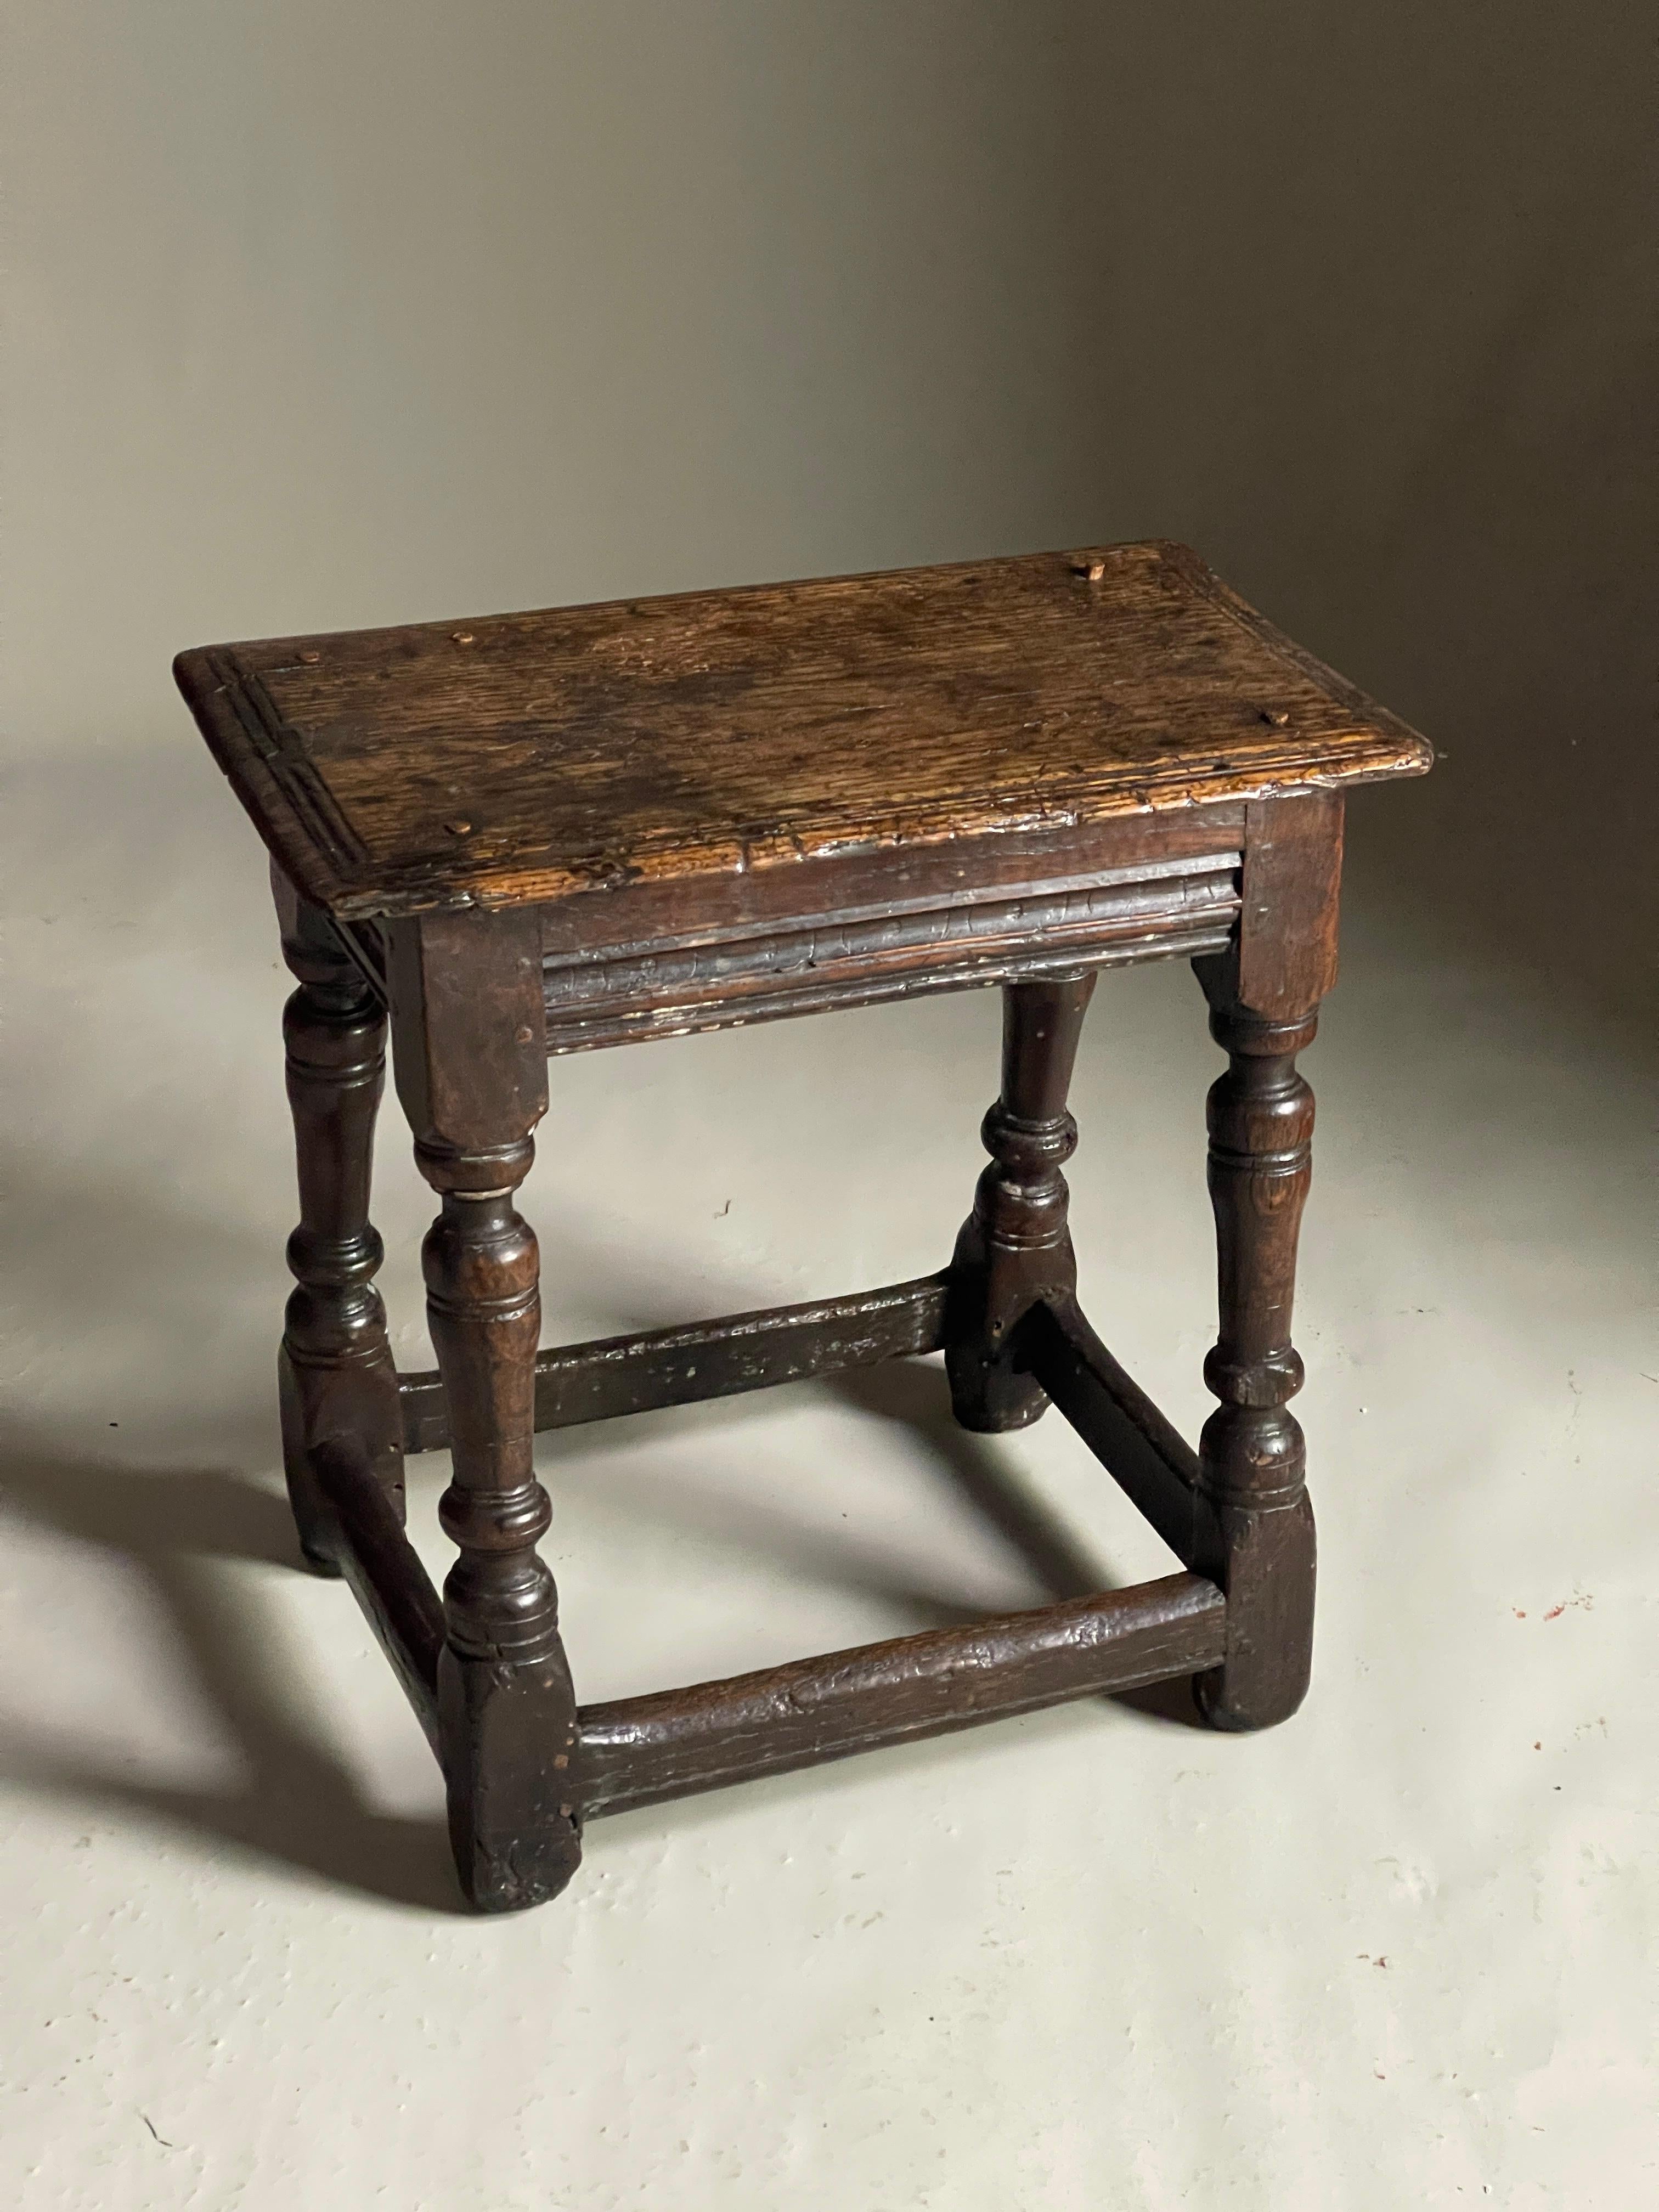 17th Century oak joined stool of good colour and patination and original condition well turned legs size top 49cms x 27 and 49 high.